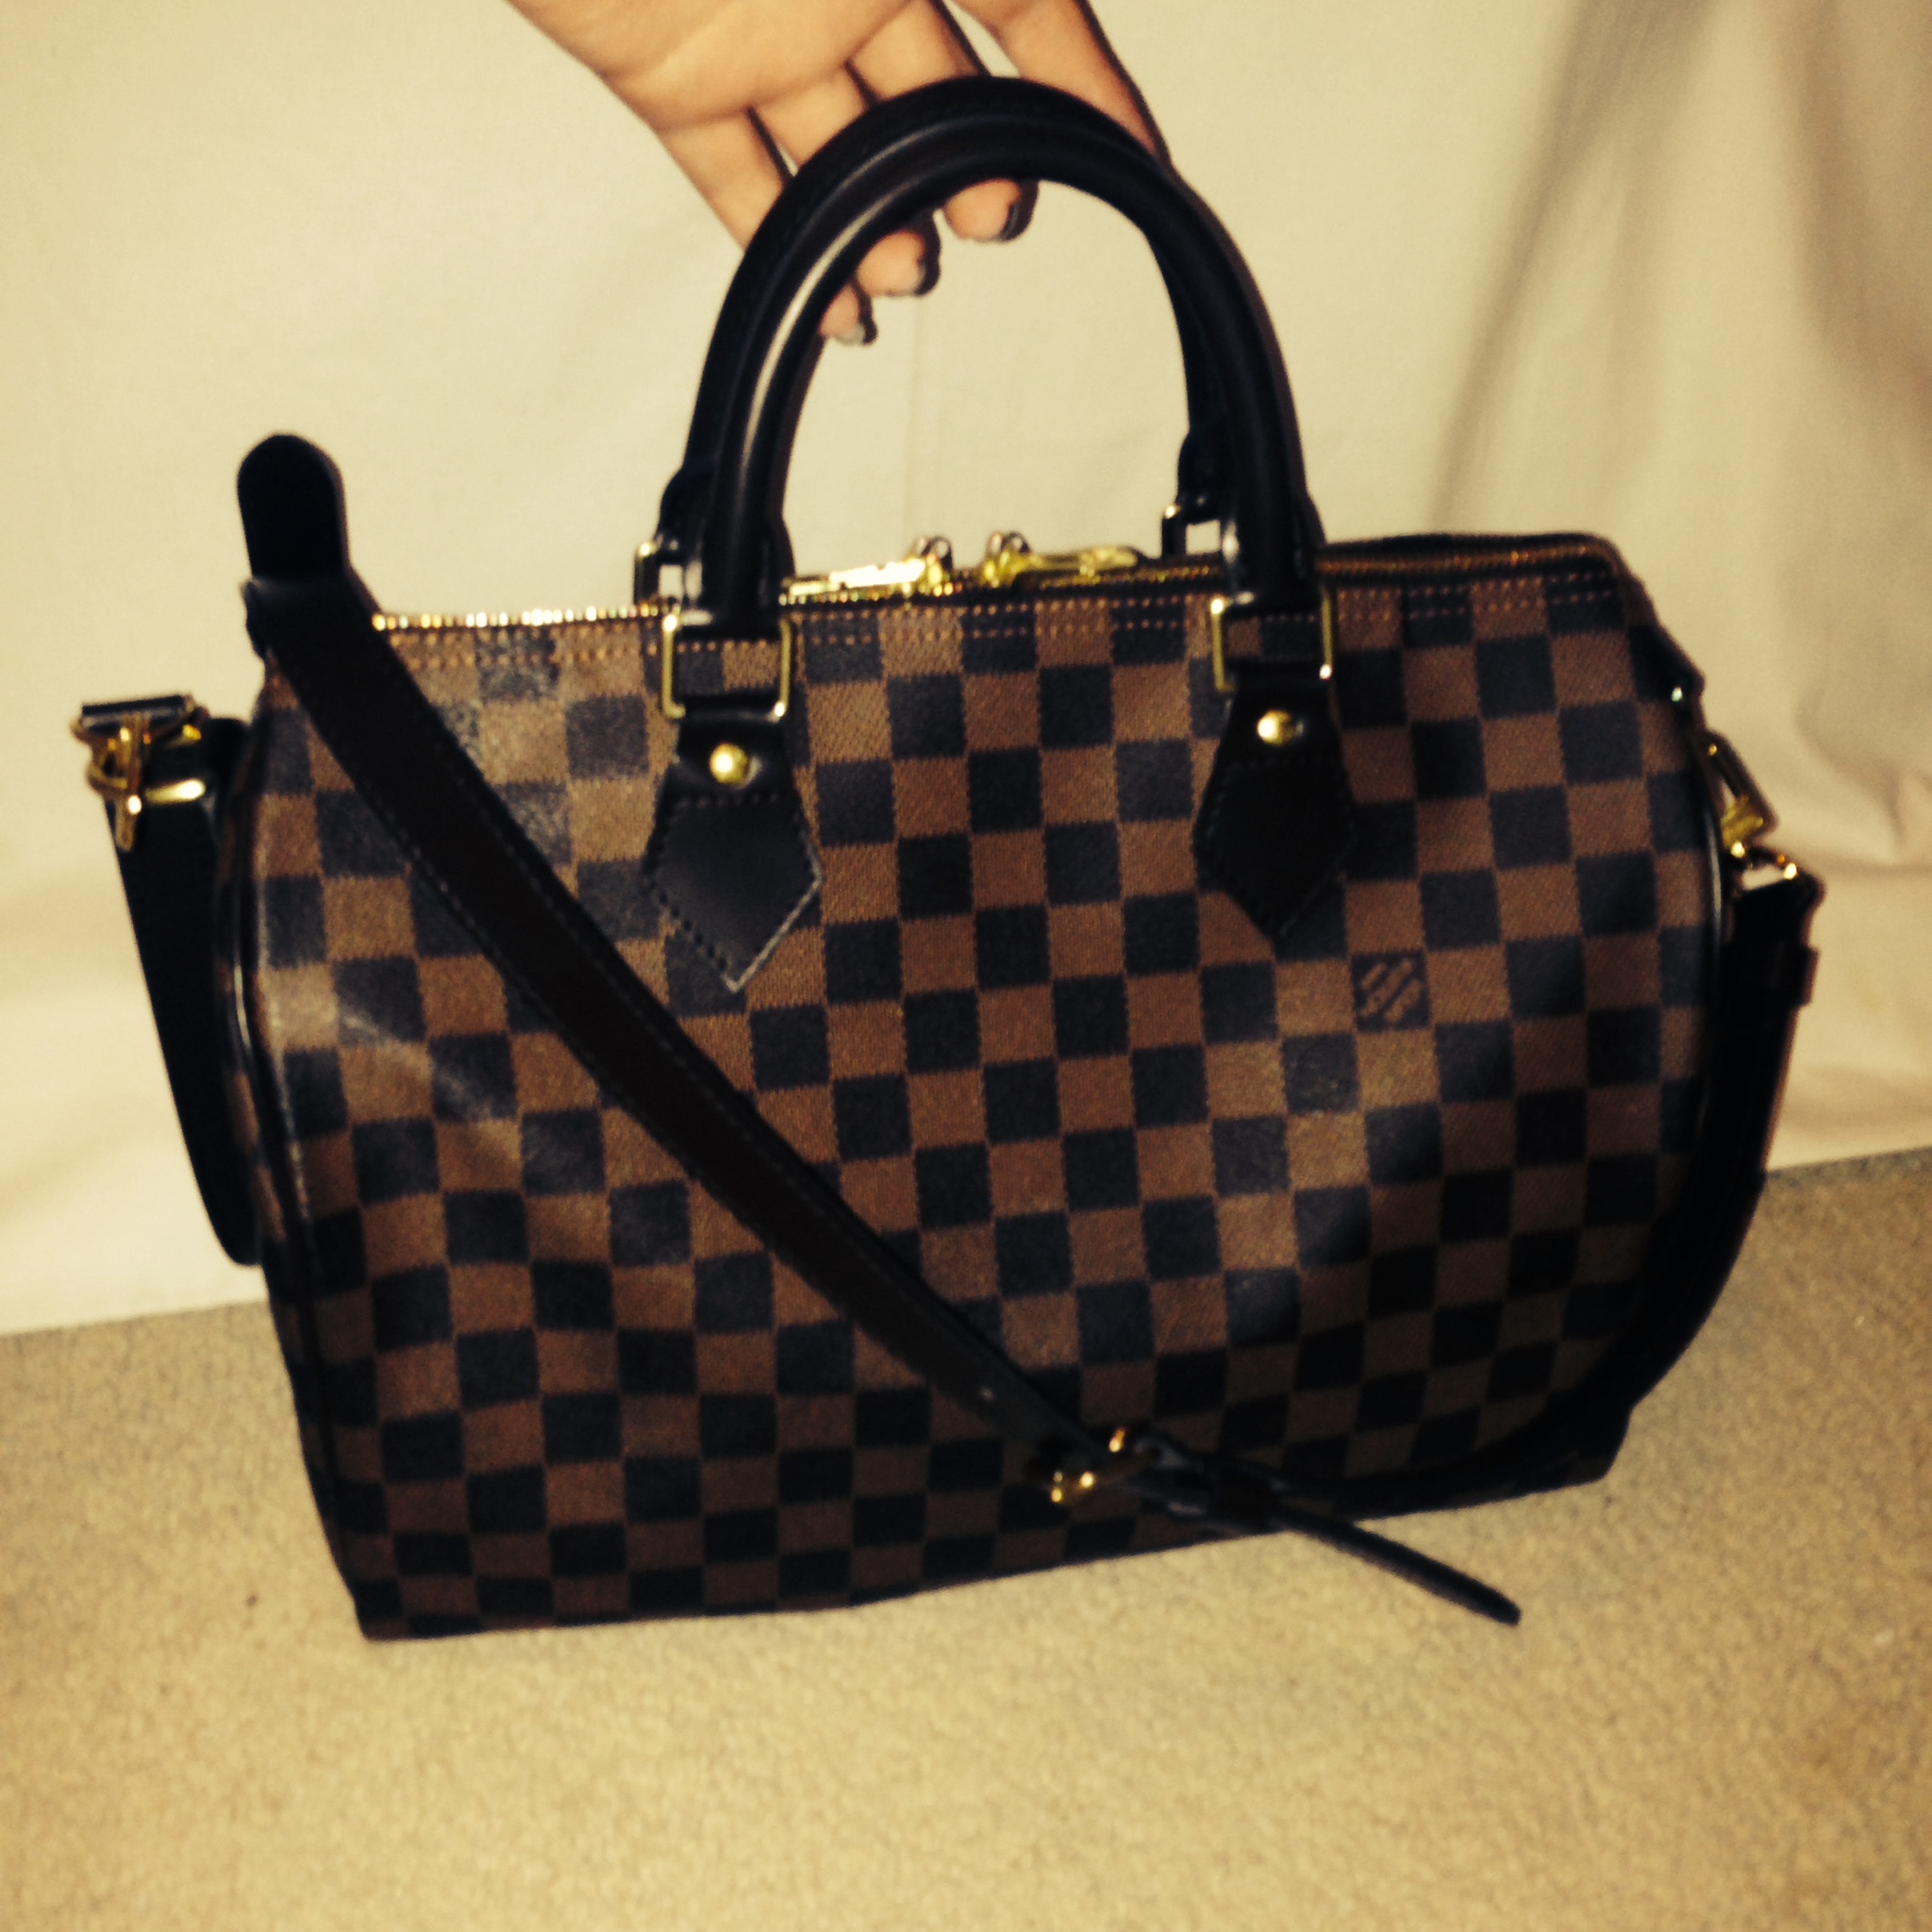 WHAT'S IN MY BAG - Louis Vuitton Speedy Bandouliere 25 Damier